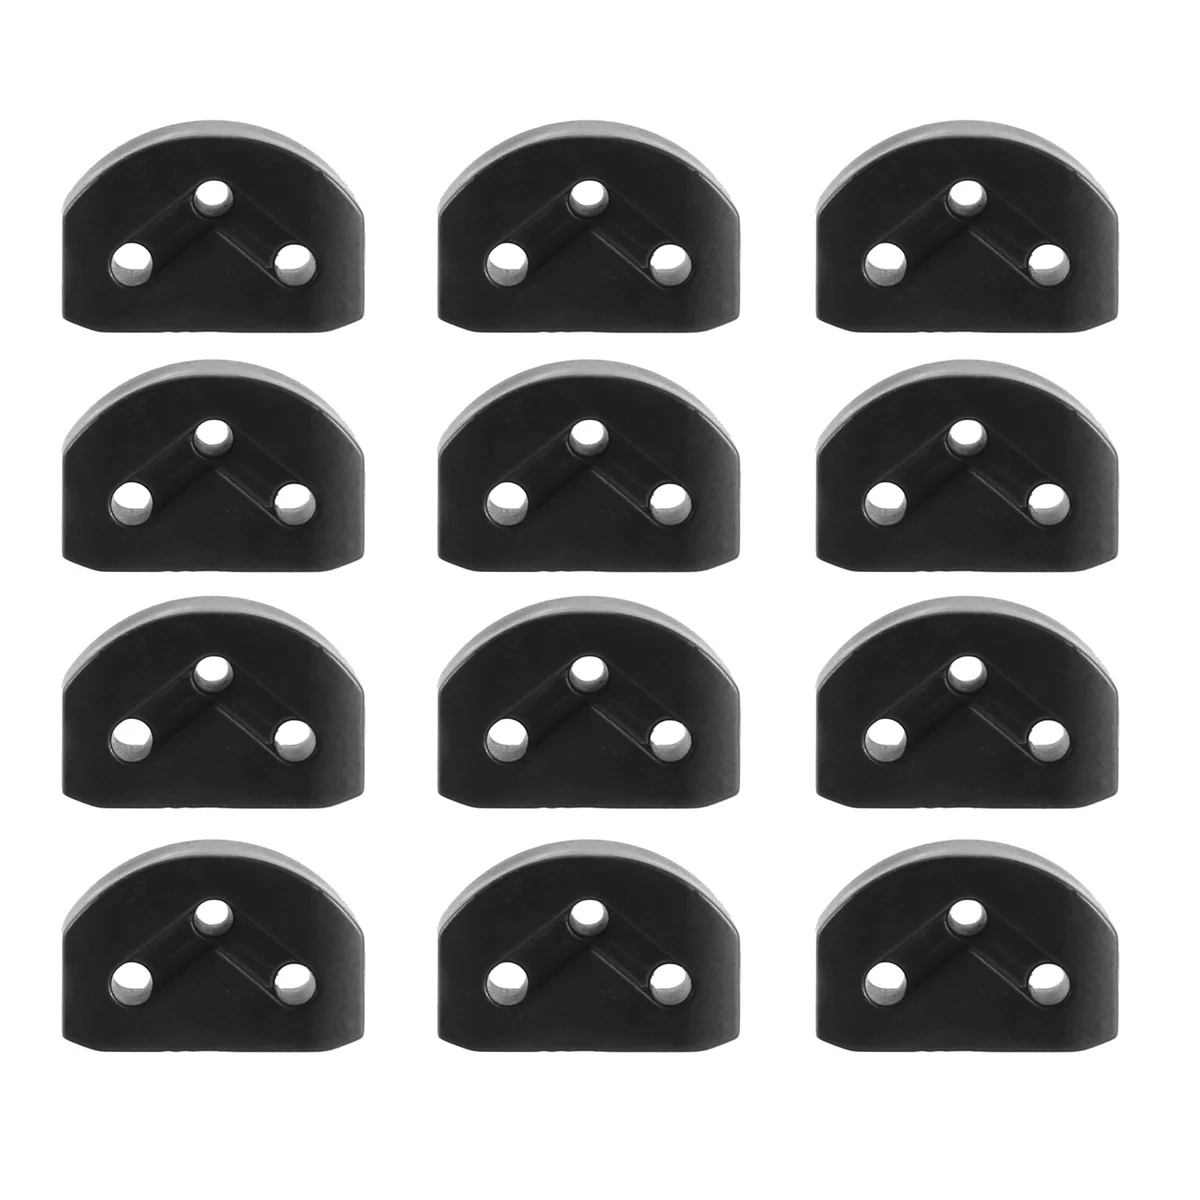 

12Pcs Classical Guitar Rollers String Trees Retainer Guides Guitar String Locks Nut Block Clamp, Black